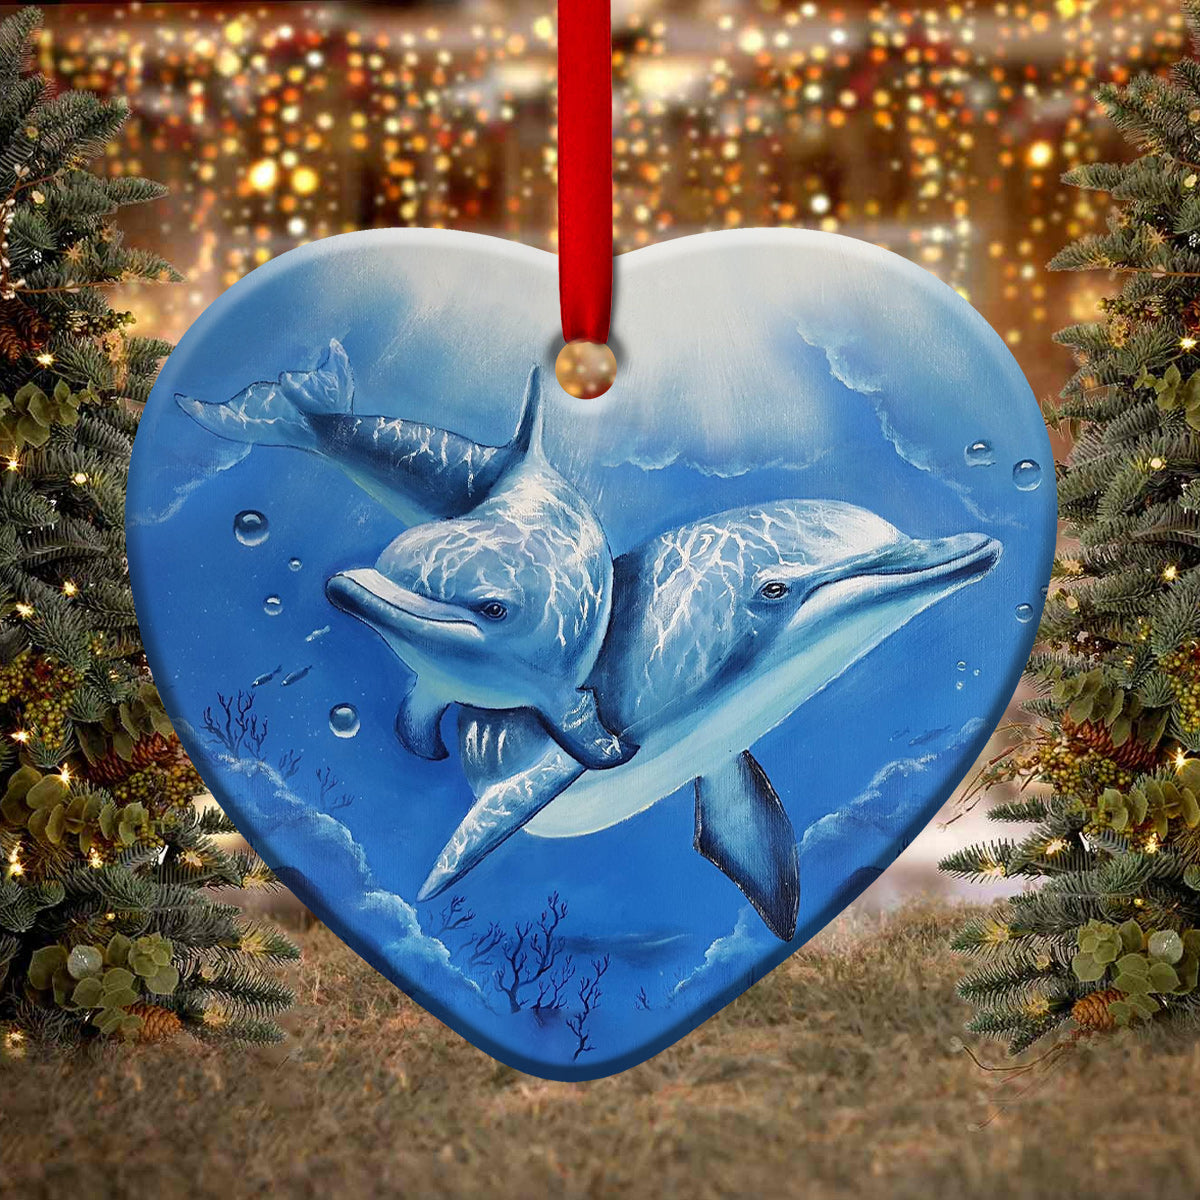 Dolphin To My Daughter Loved You - Heart Ornament - Owls Matrix LTD